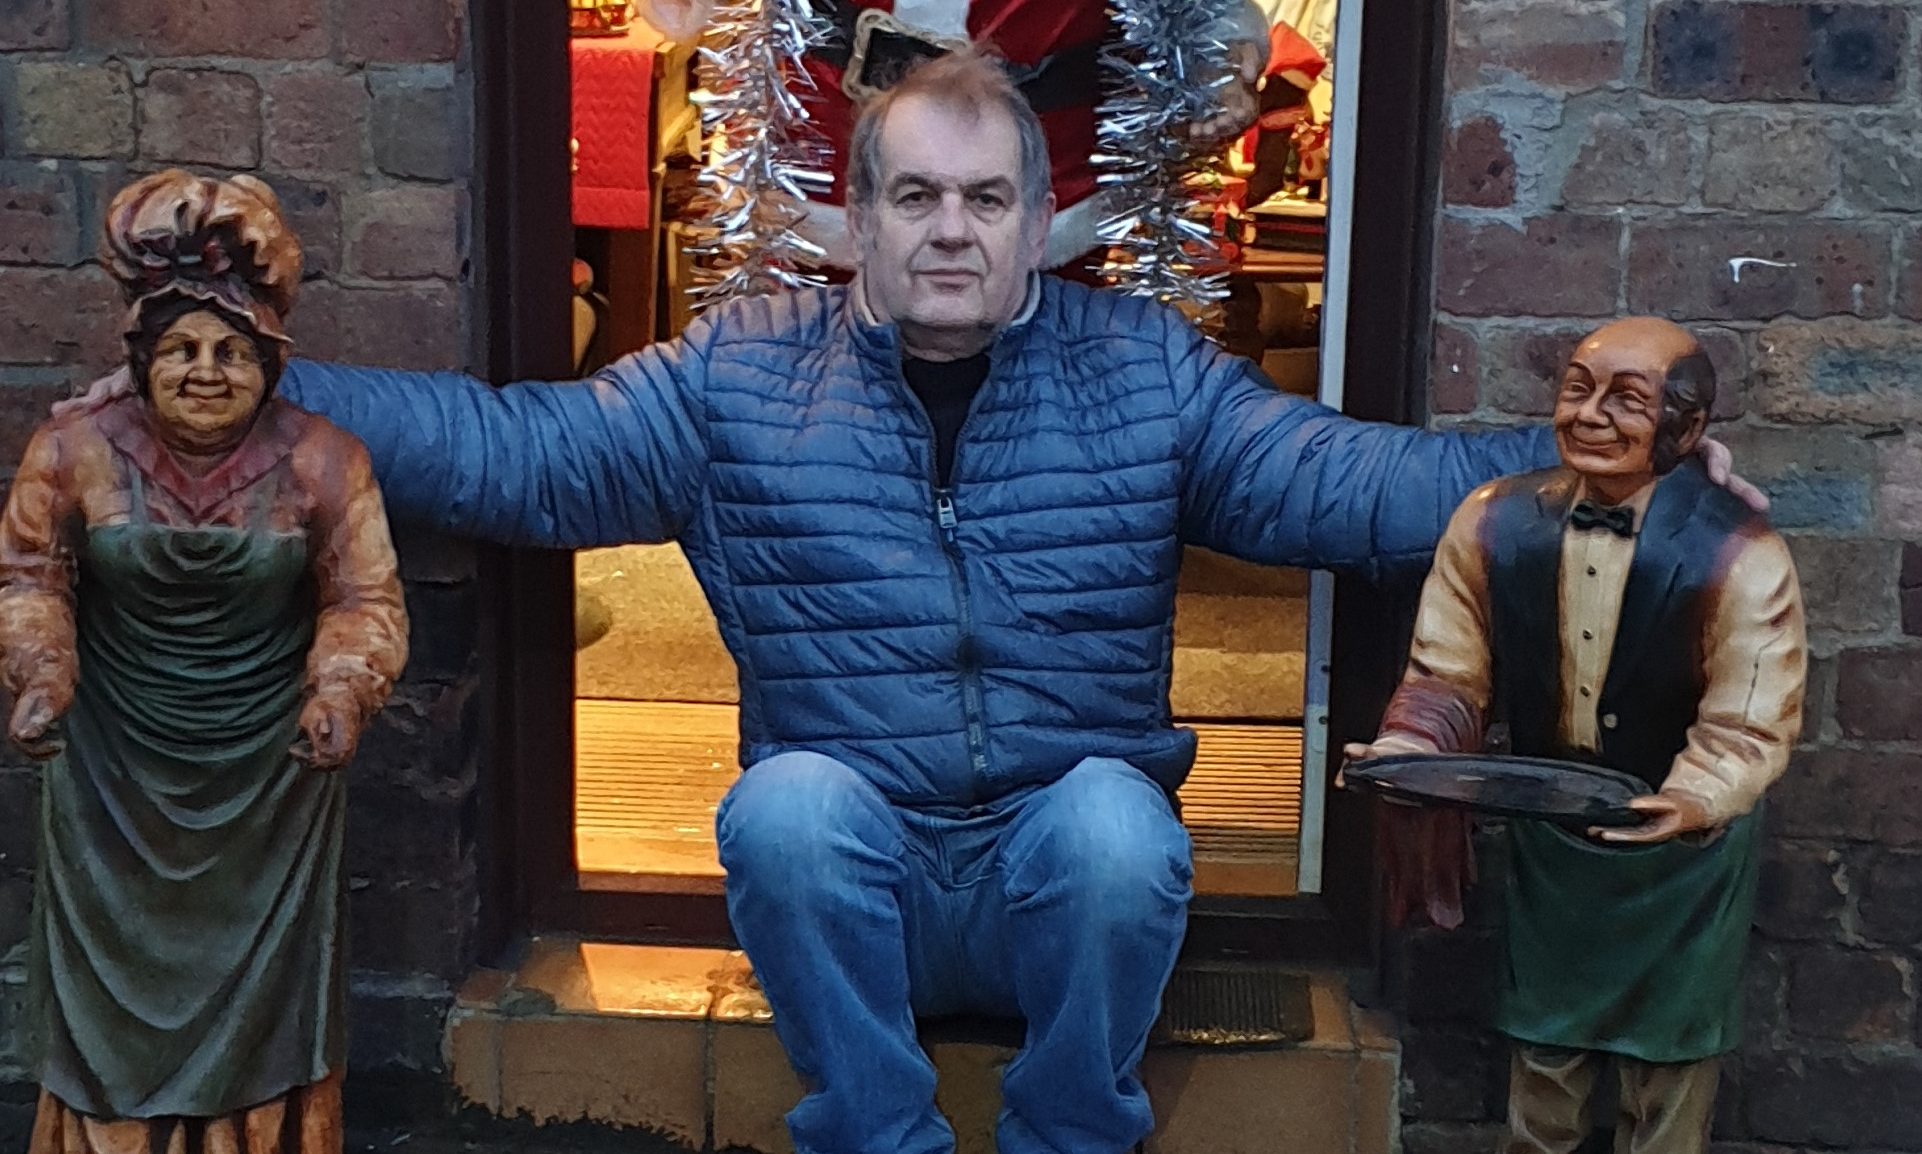 Derek Pook, owner of Clepington Antiques and Collectables Centre, with the statues.